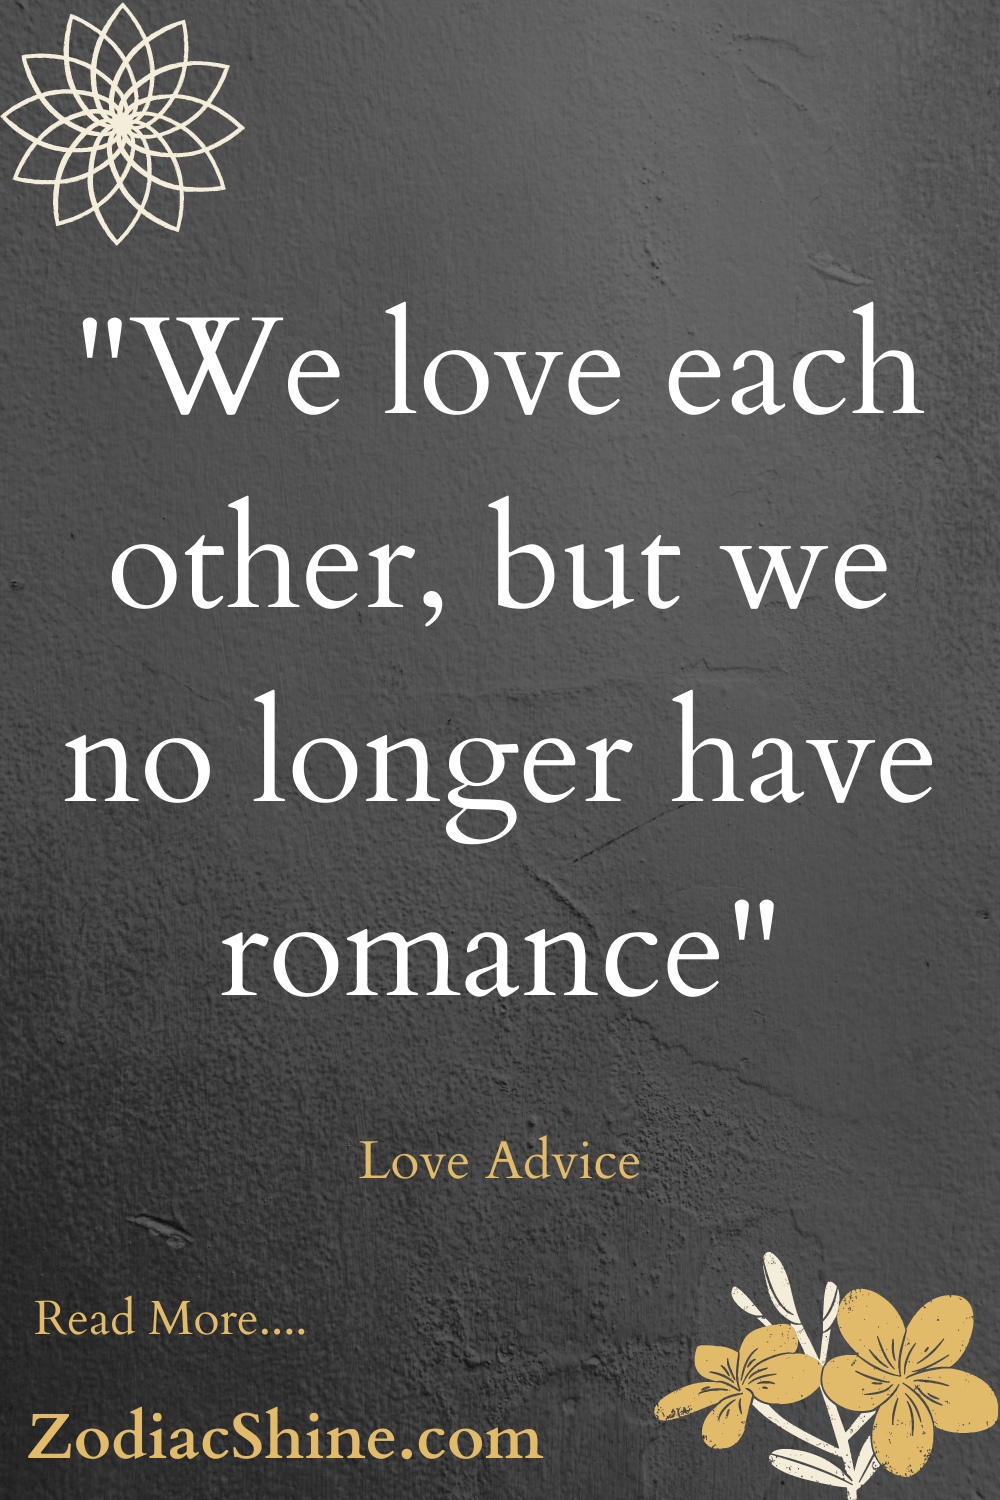 "We love each other, but we no longer have romance"